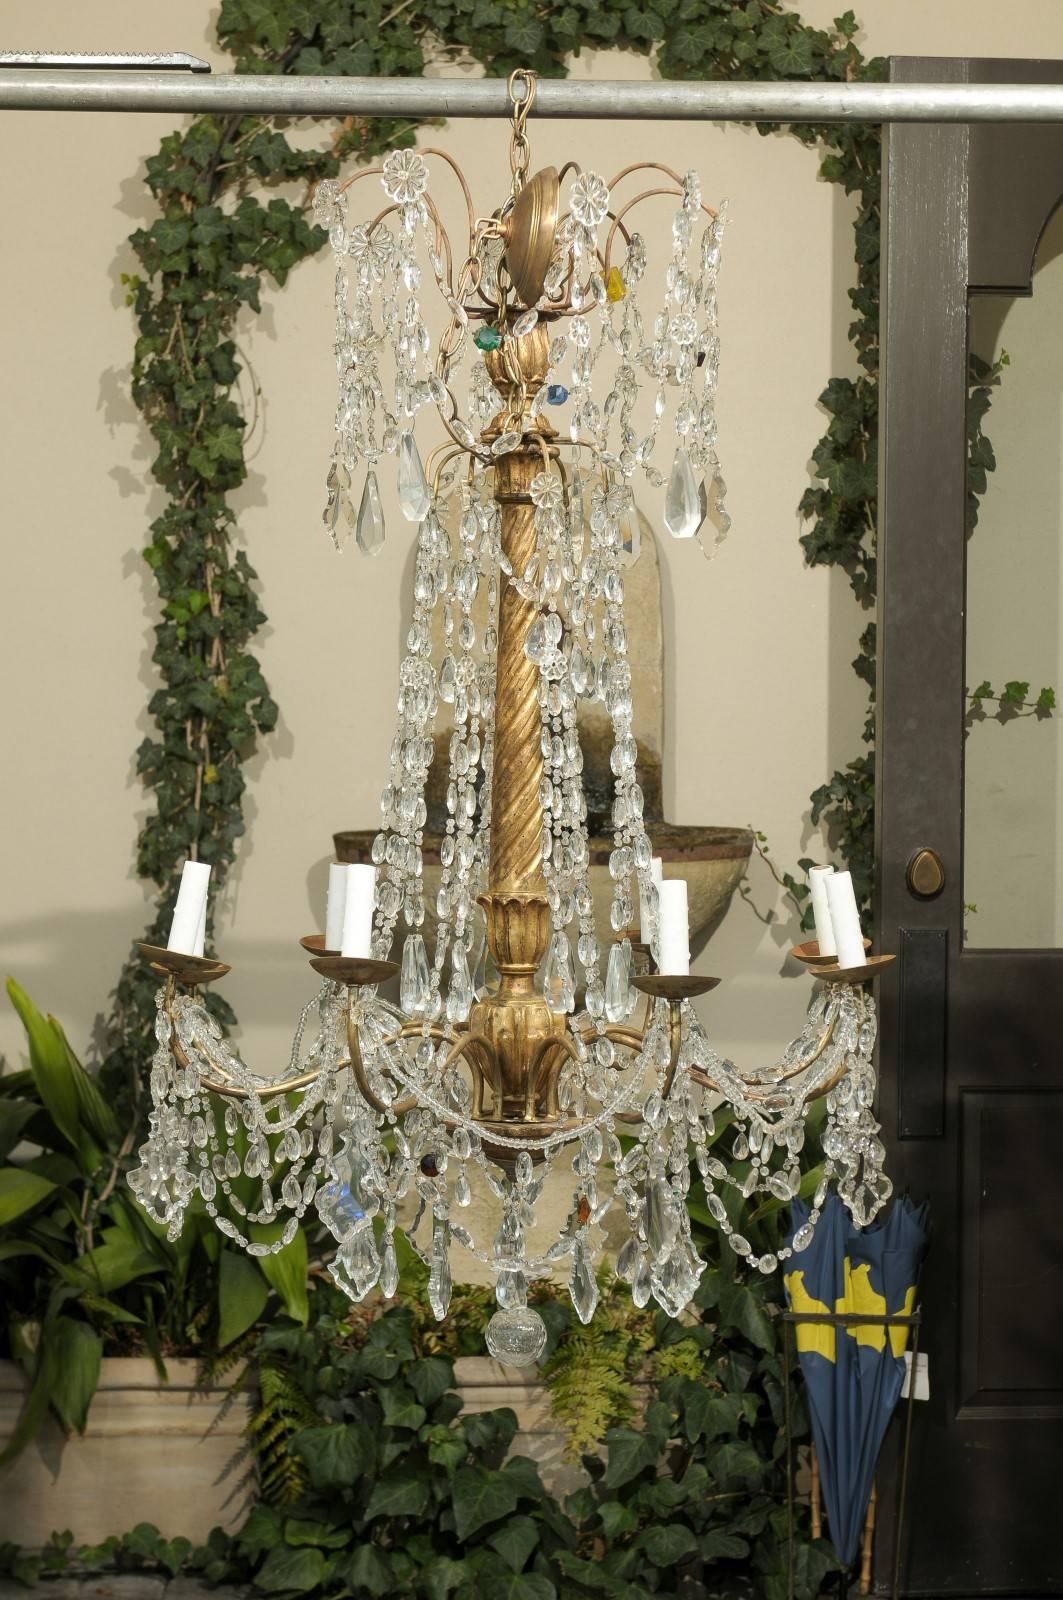 This Italian eight light crystal chandelier features a gilded and twisted wood central column with floral motif. The upper section is adorned with a variety of faceted crystals and rosettes. In the midst of these delicate ornaments, sits a green,